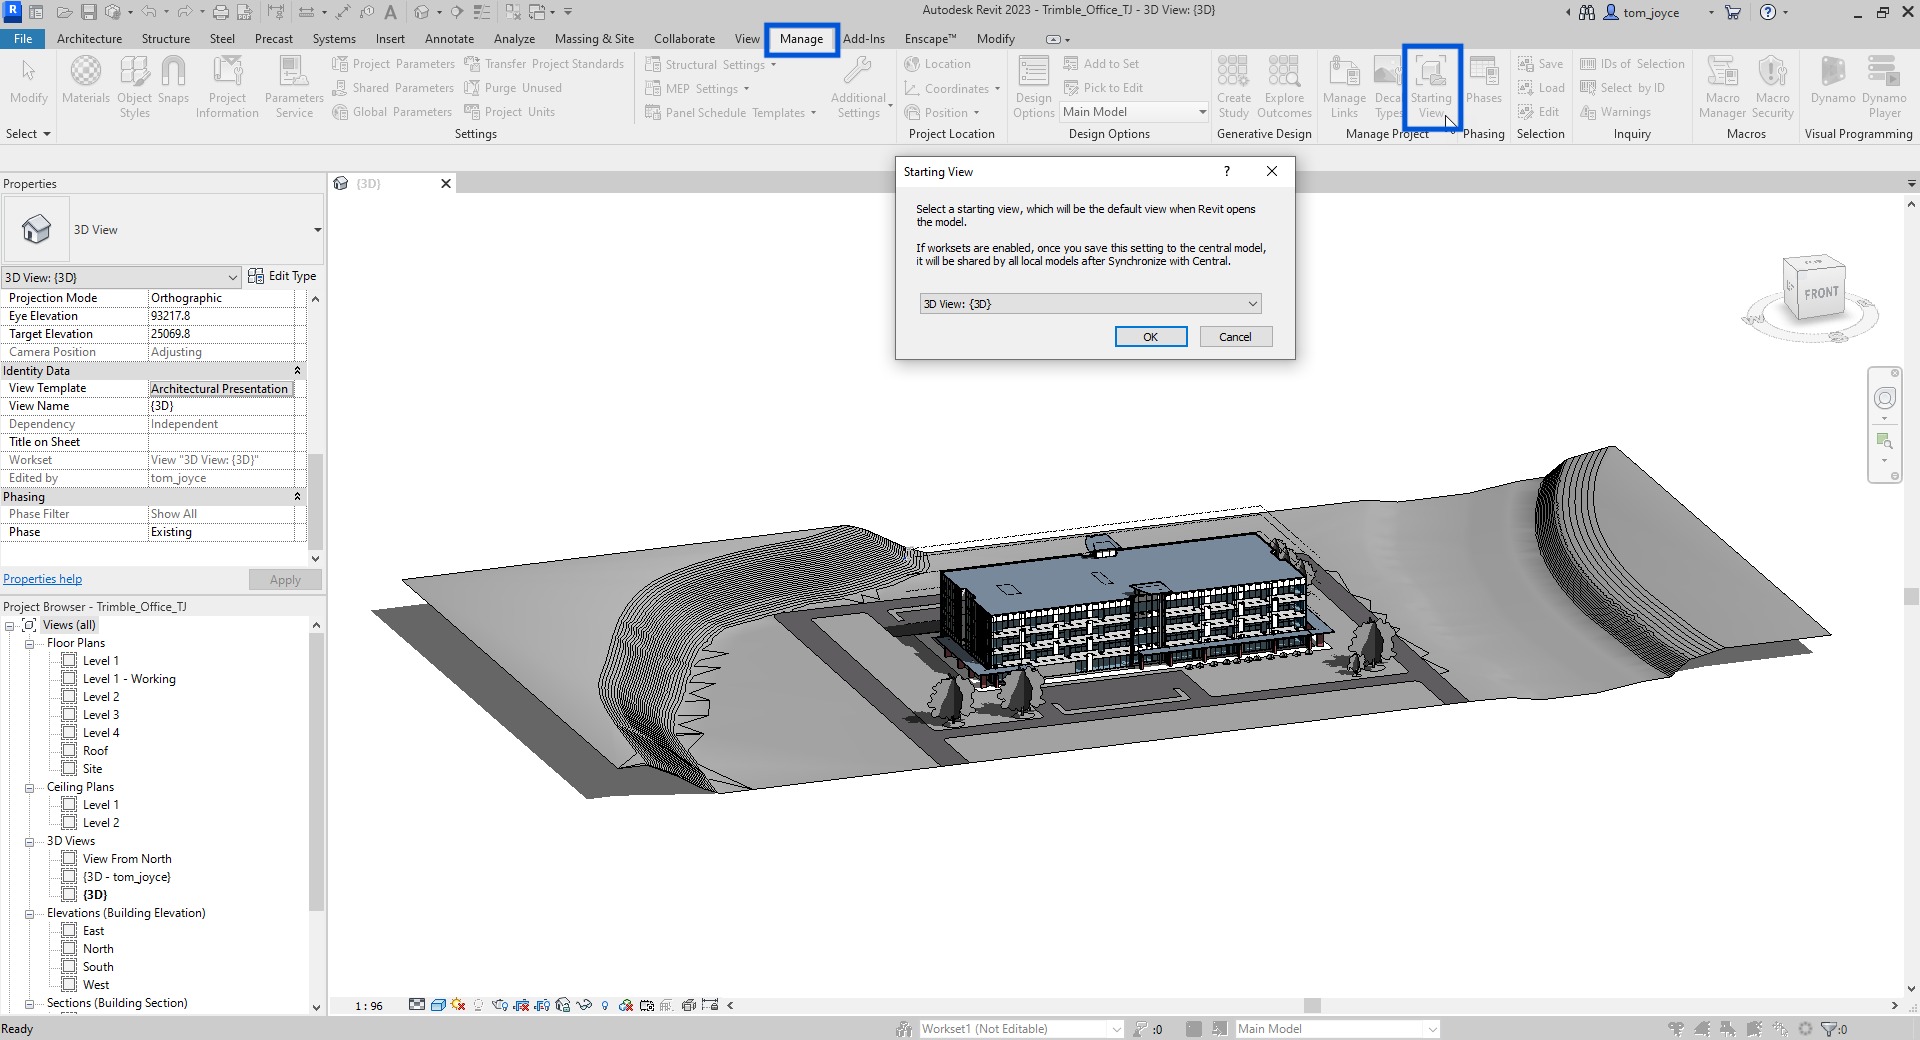 Revit interface showing the starting view